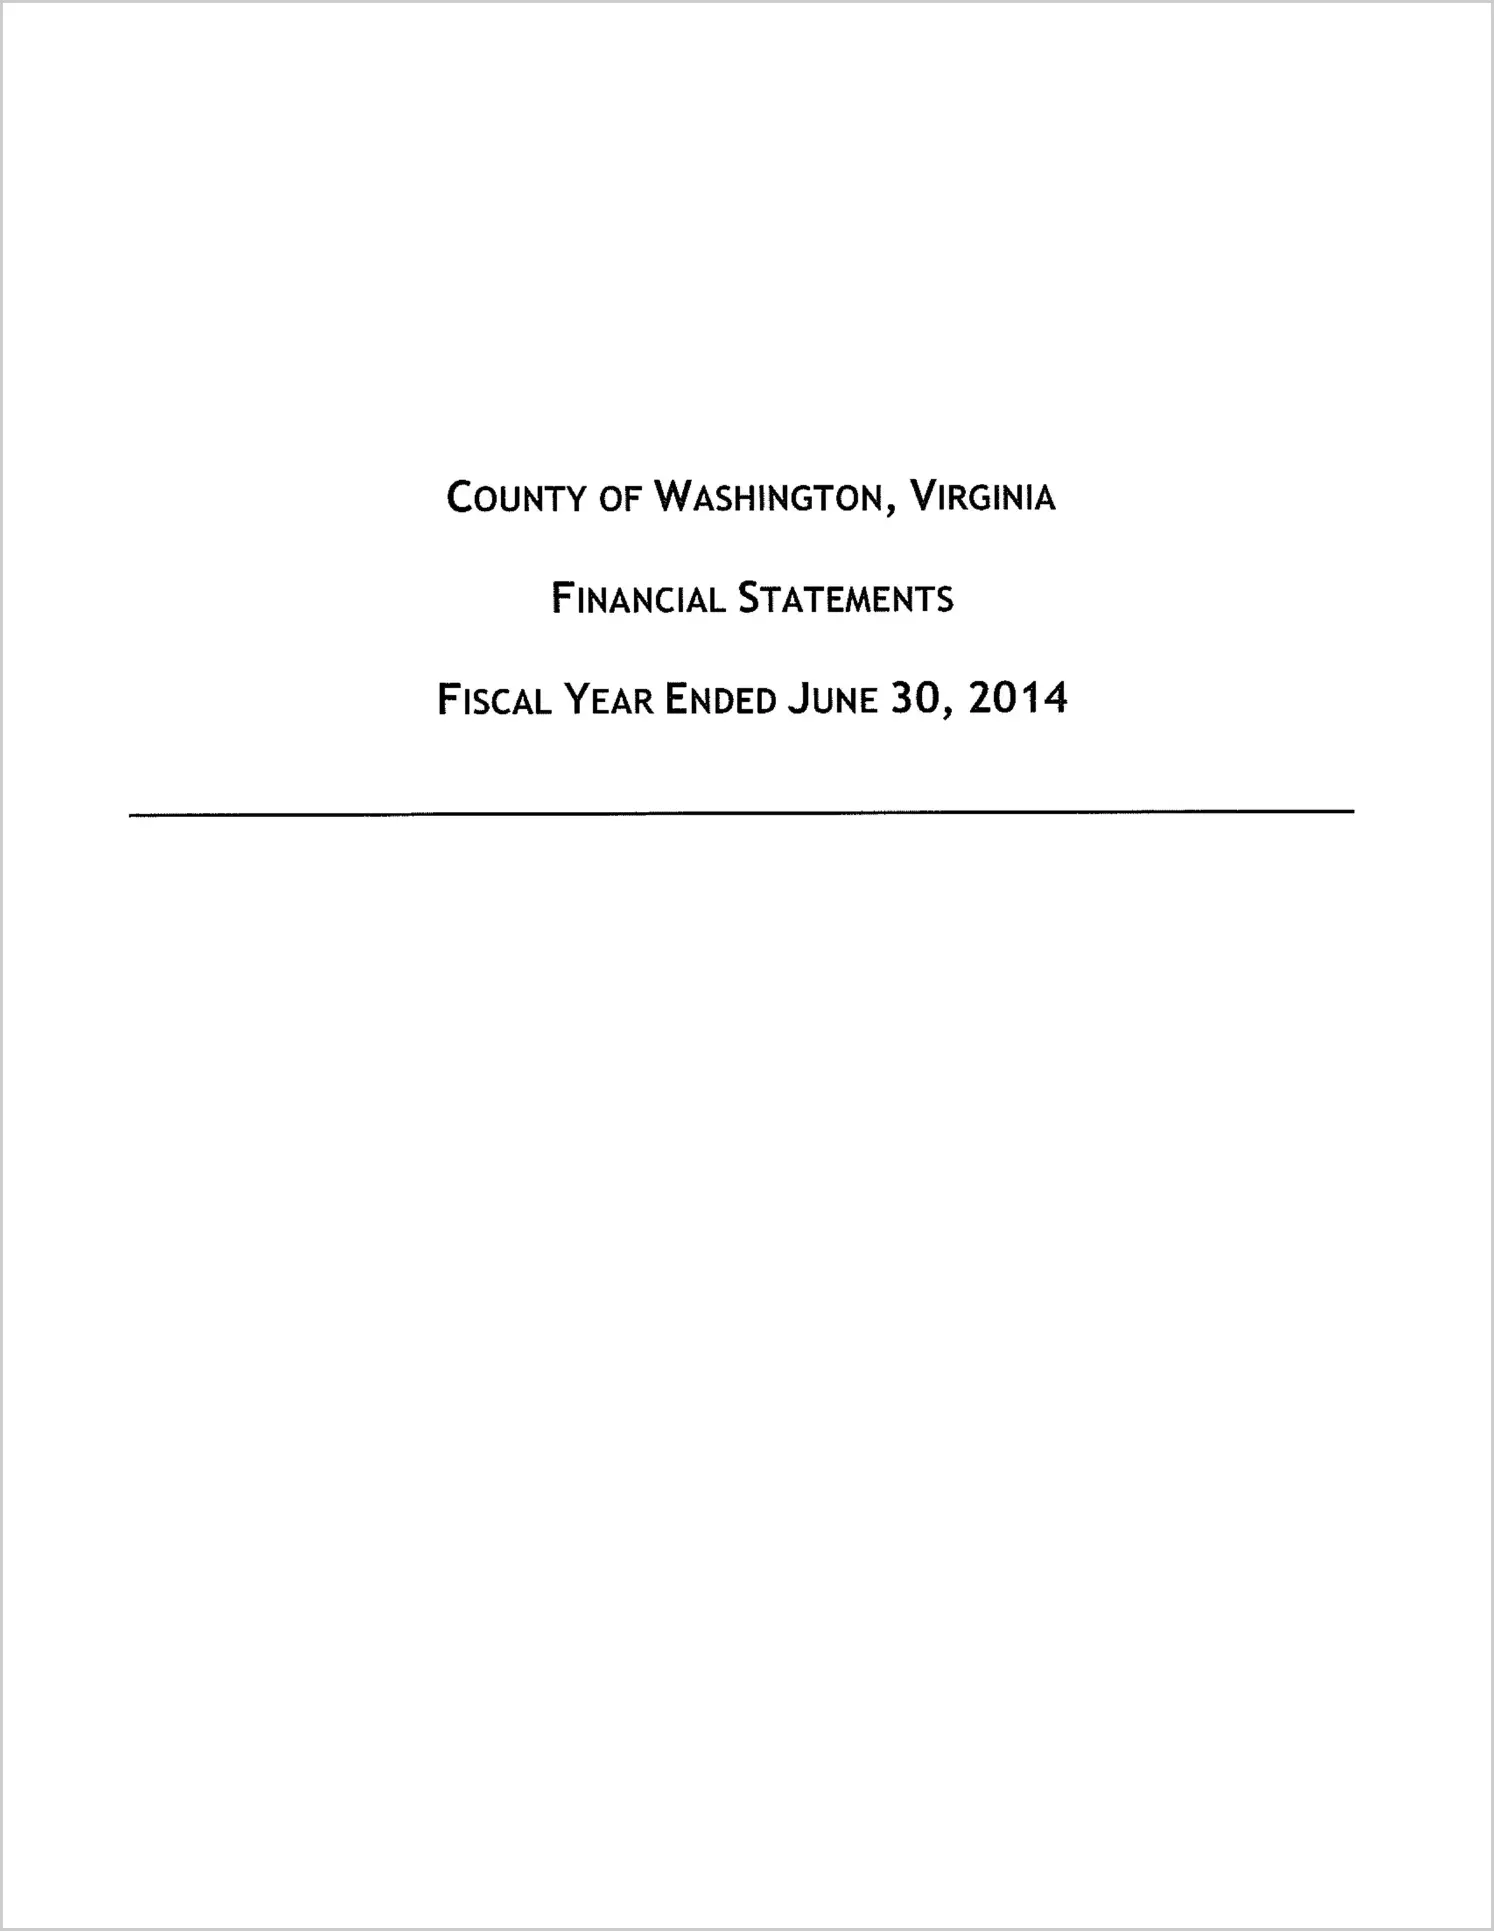 2014 Annual Financial Report for County of Washington